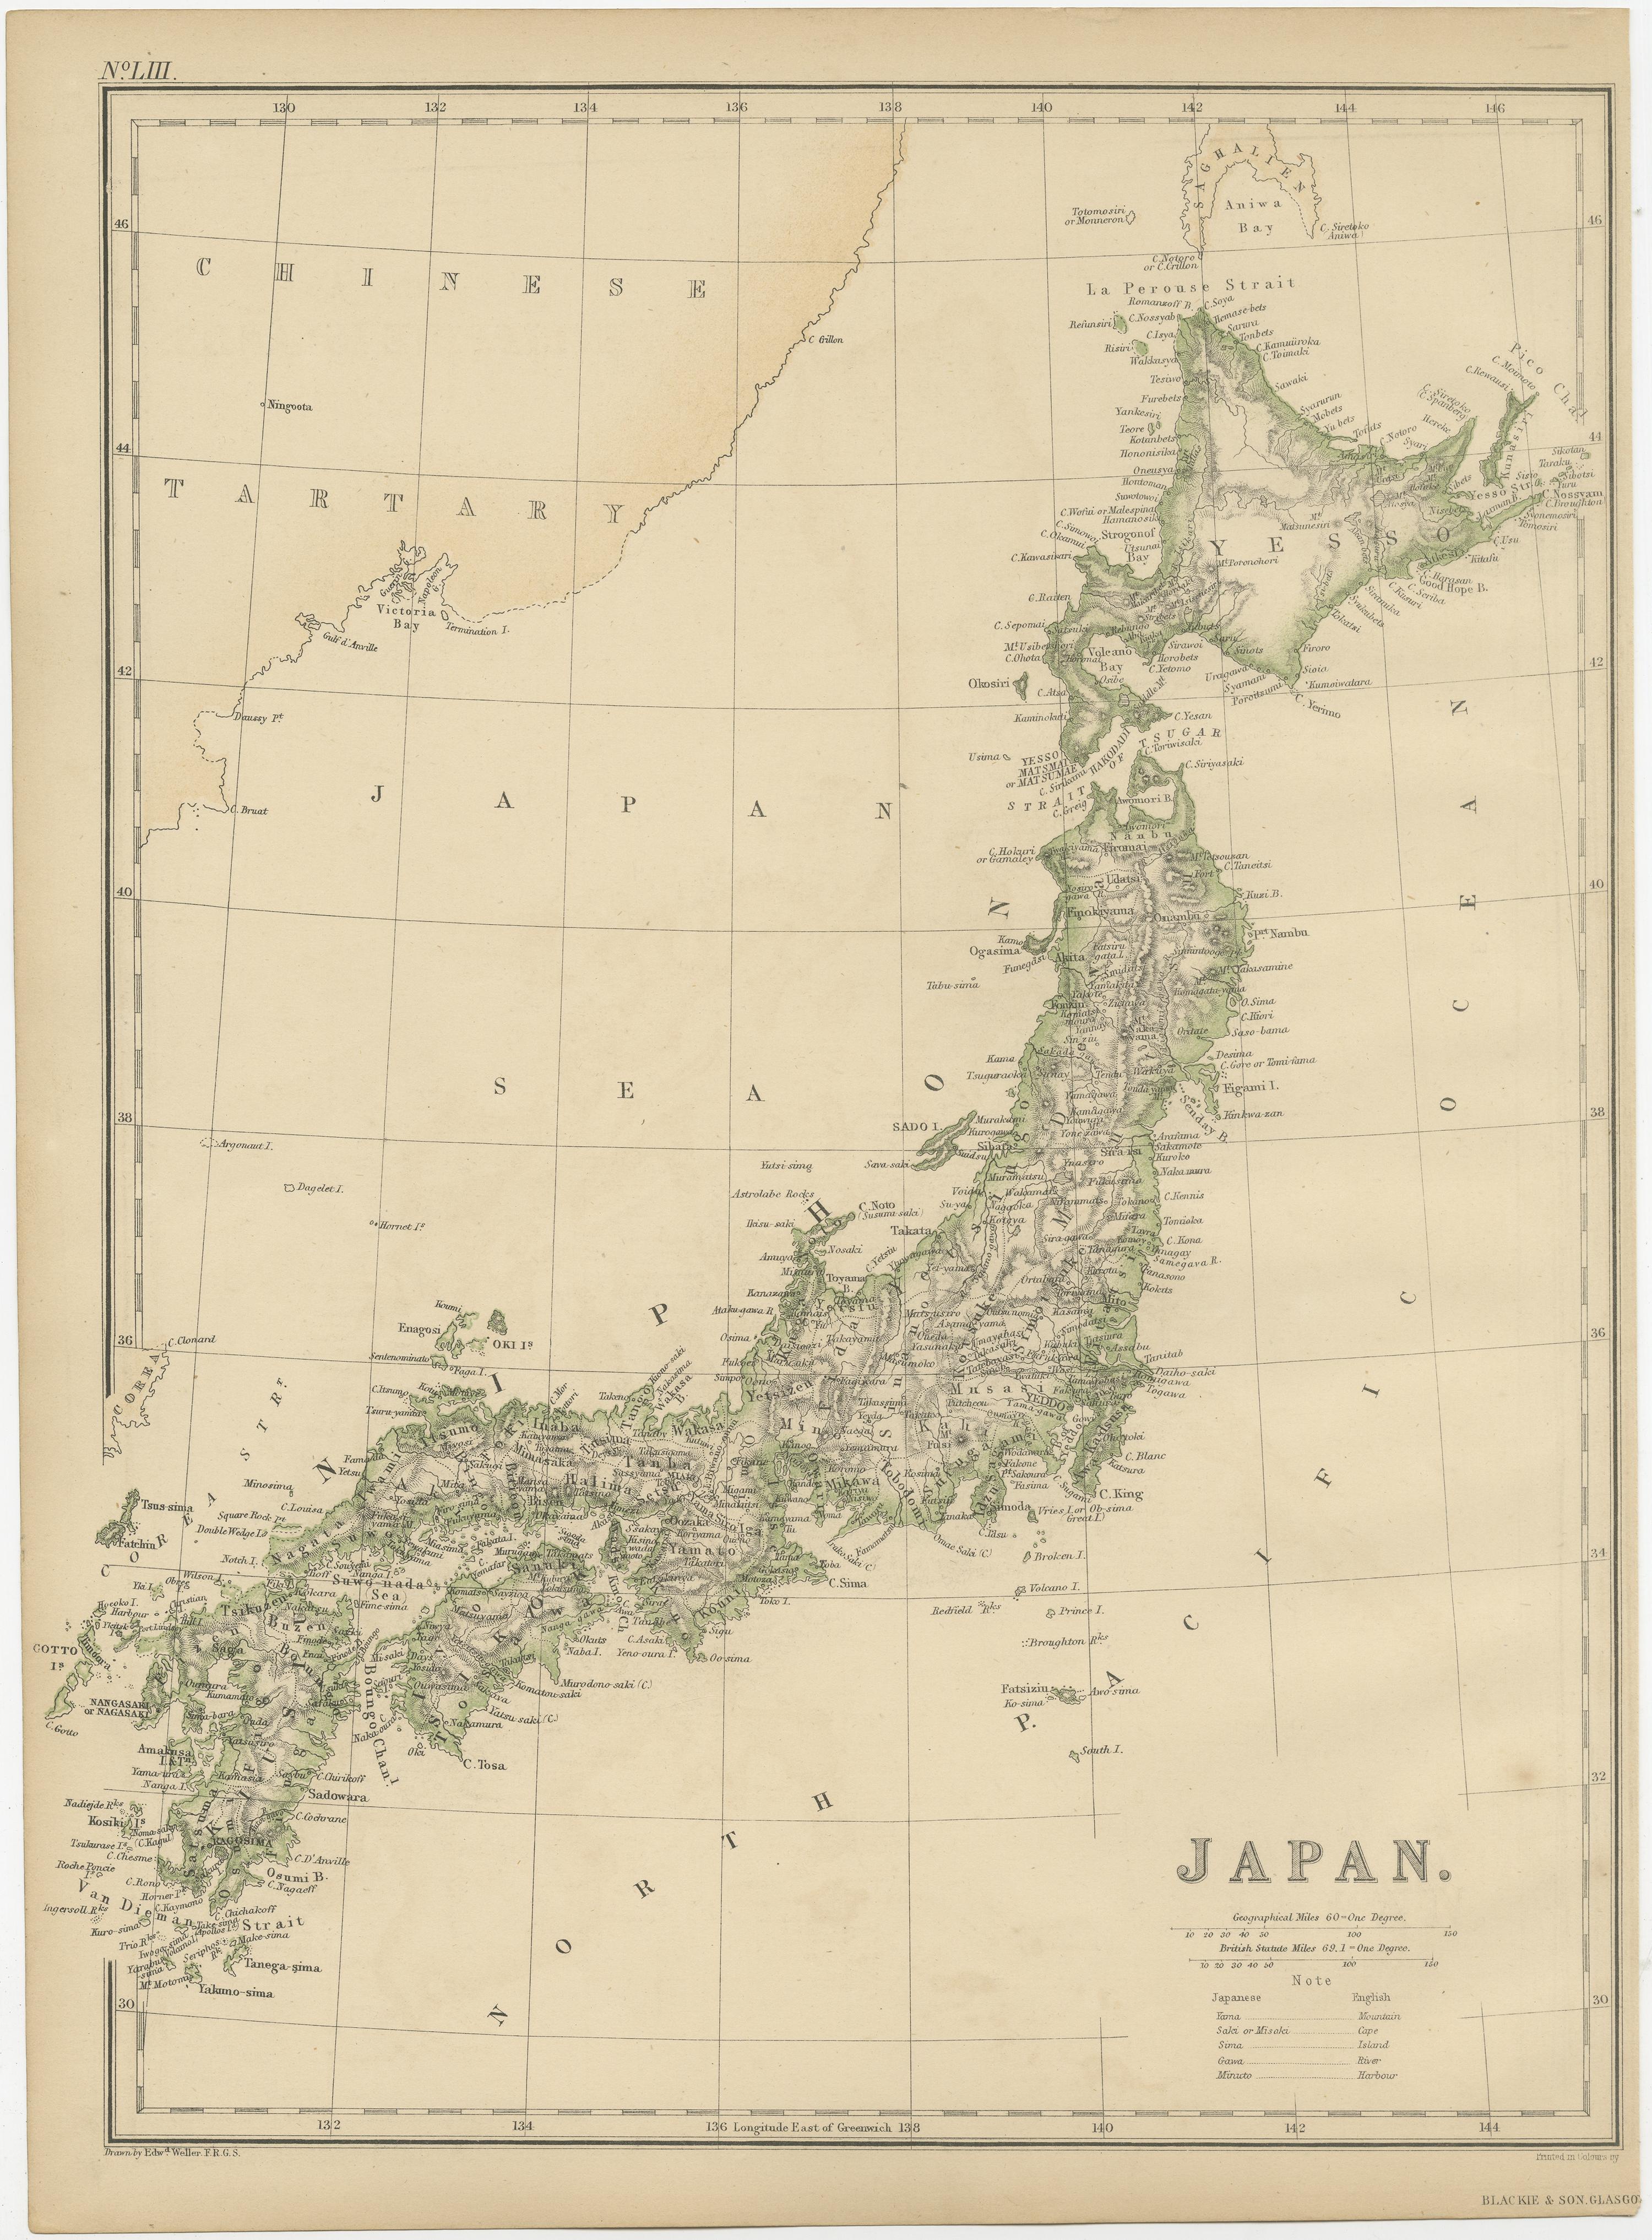 imperial japan map